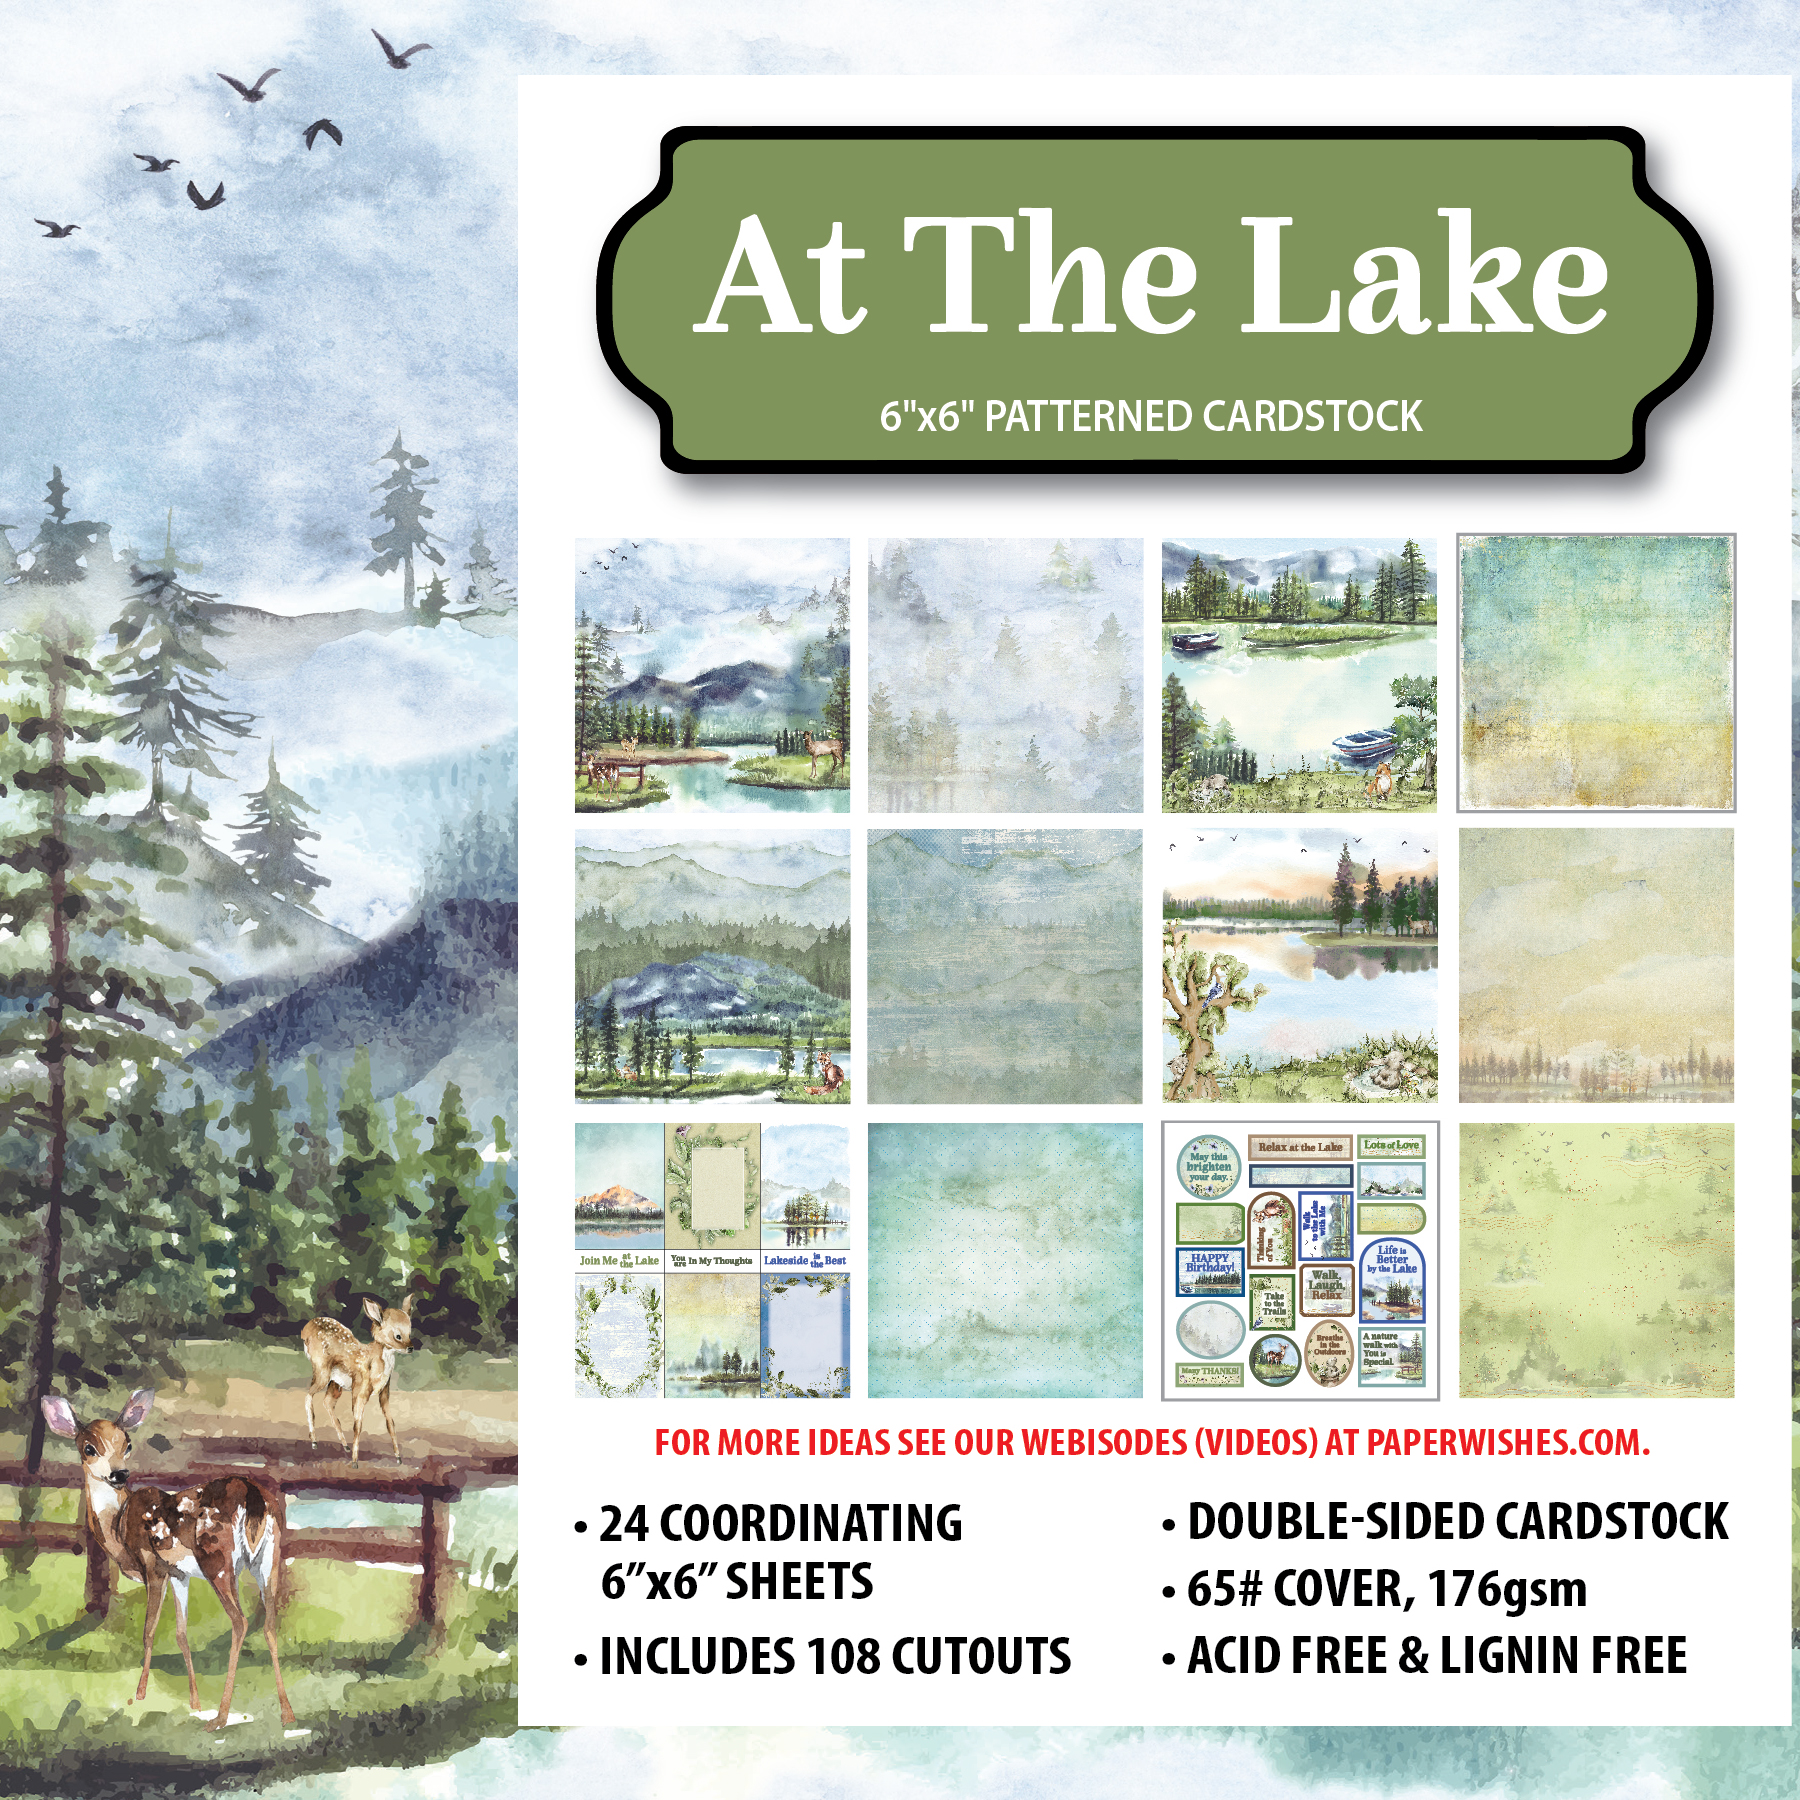 At the Lake 6x6 Patterned Cardstock